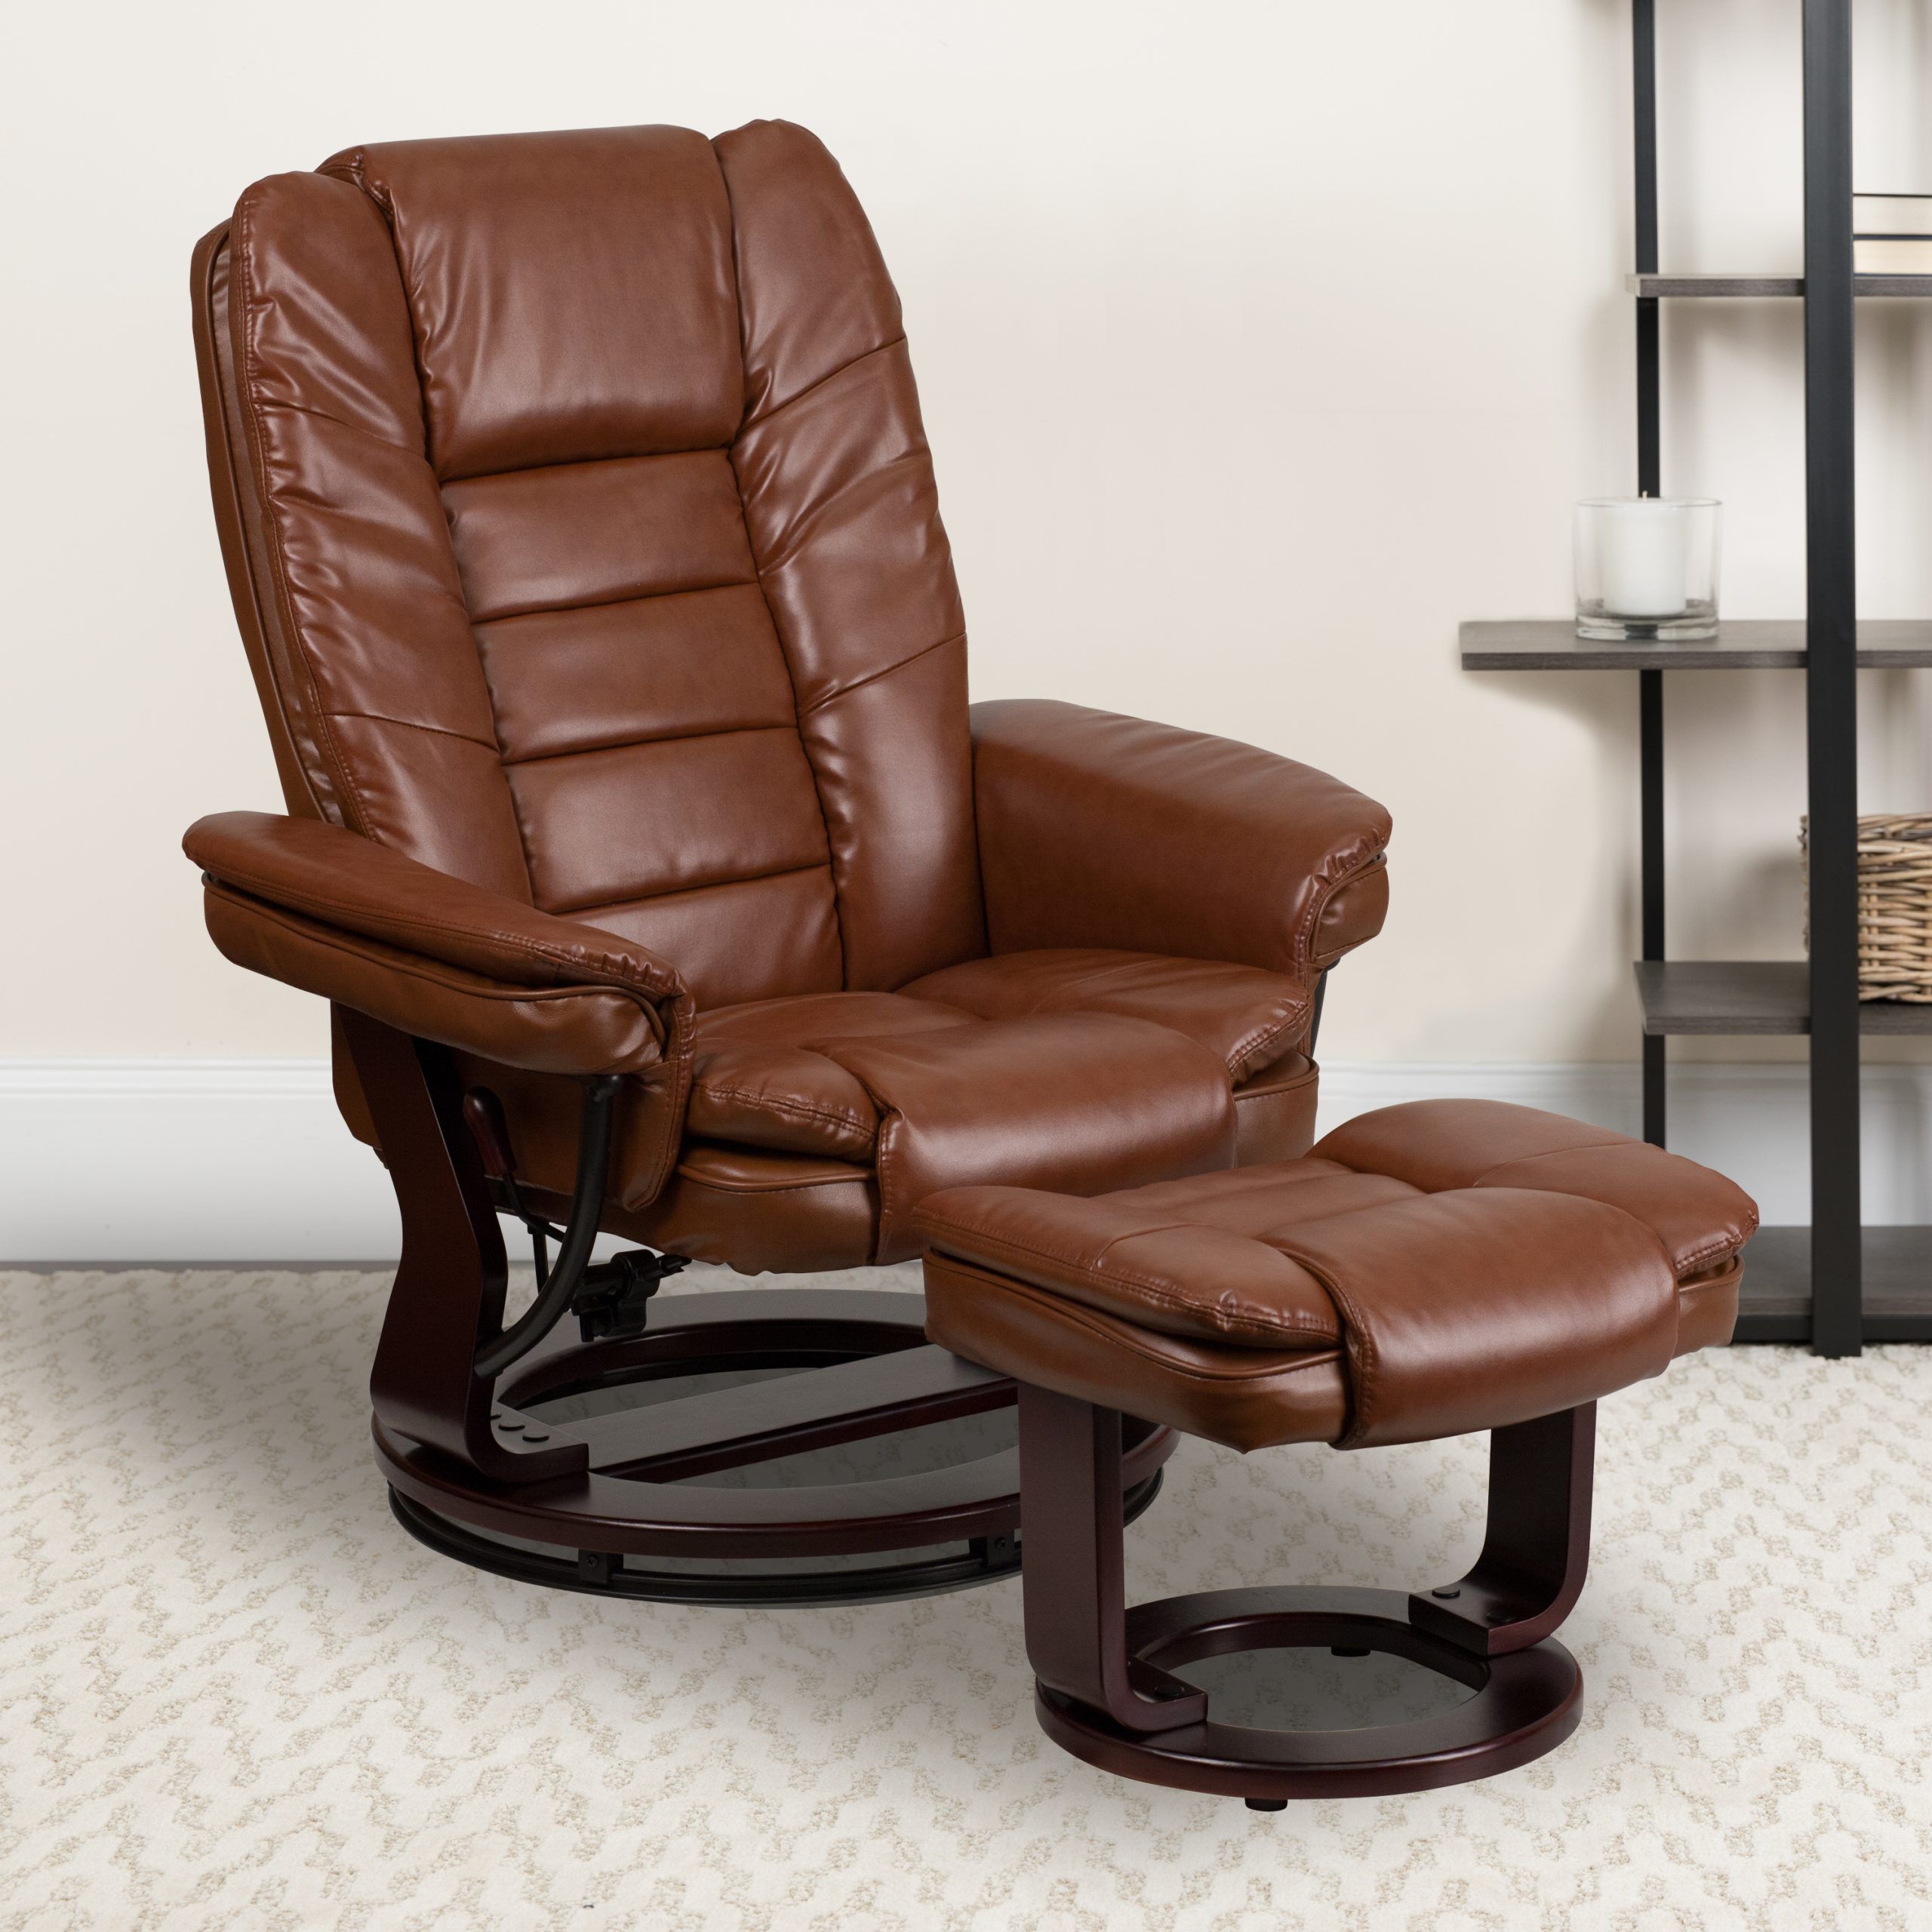 Flash Furniture Contemporary Multi Position Recliner With Horizontal With Regard To Chrome Swivel Ottomans (View 18 of 20)